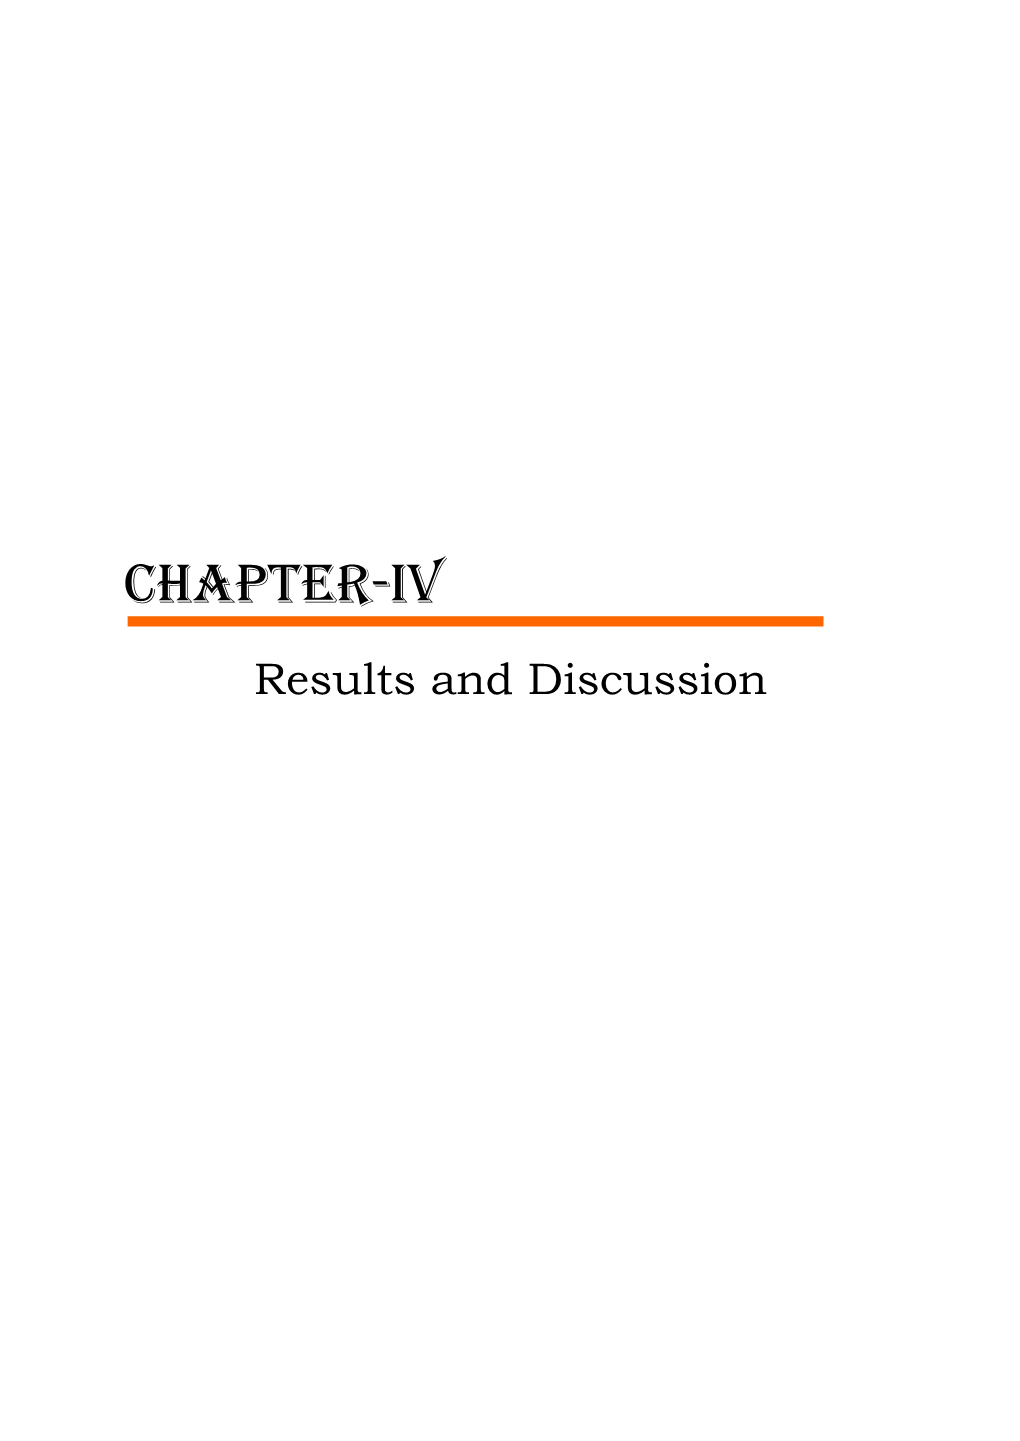 CHAPTER-IV Results and Discussion